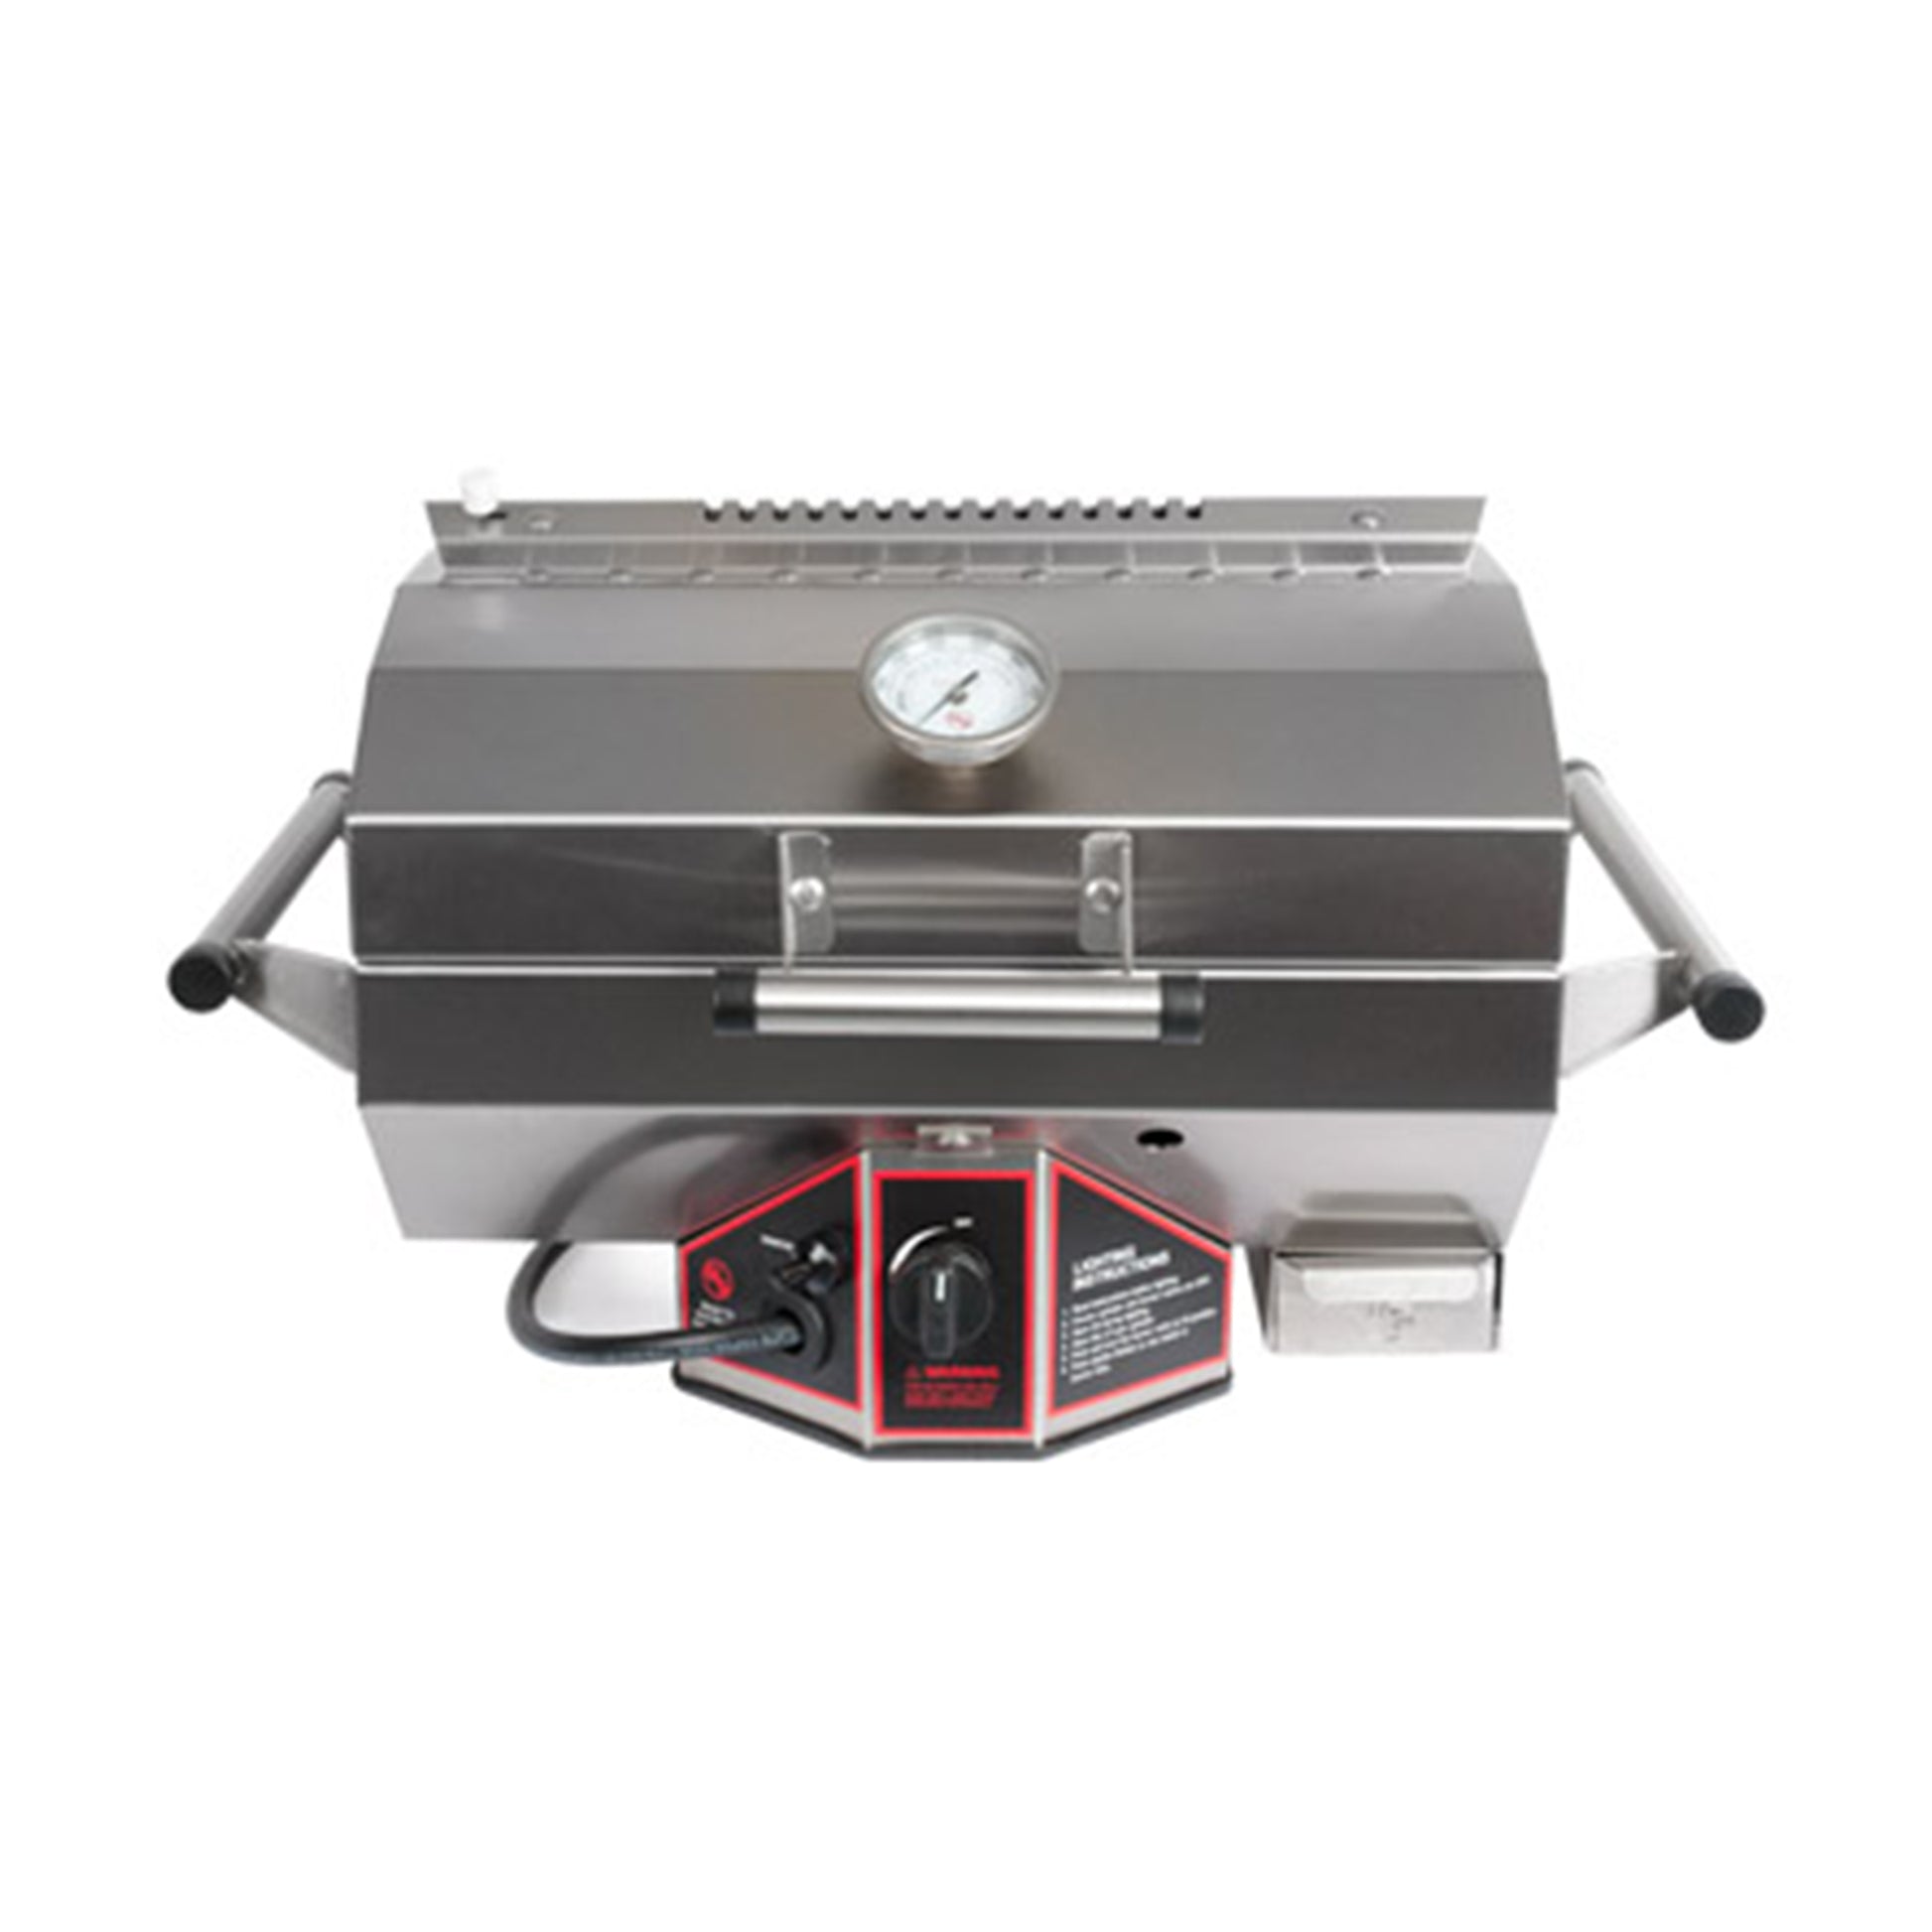 Portable Outdoor Propane Oven Stove Combo for Camping, RV, Tailgating,  Trailer